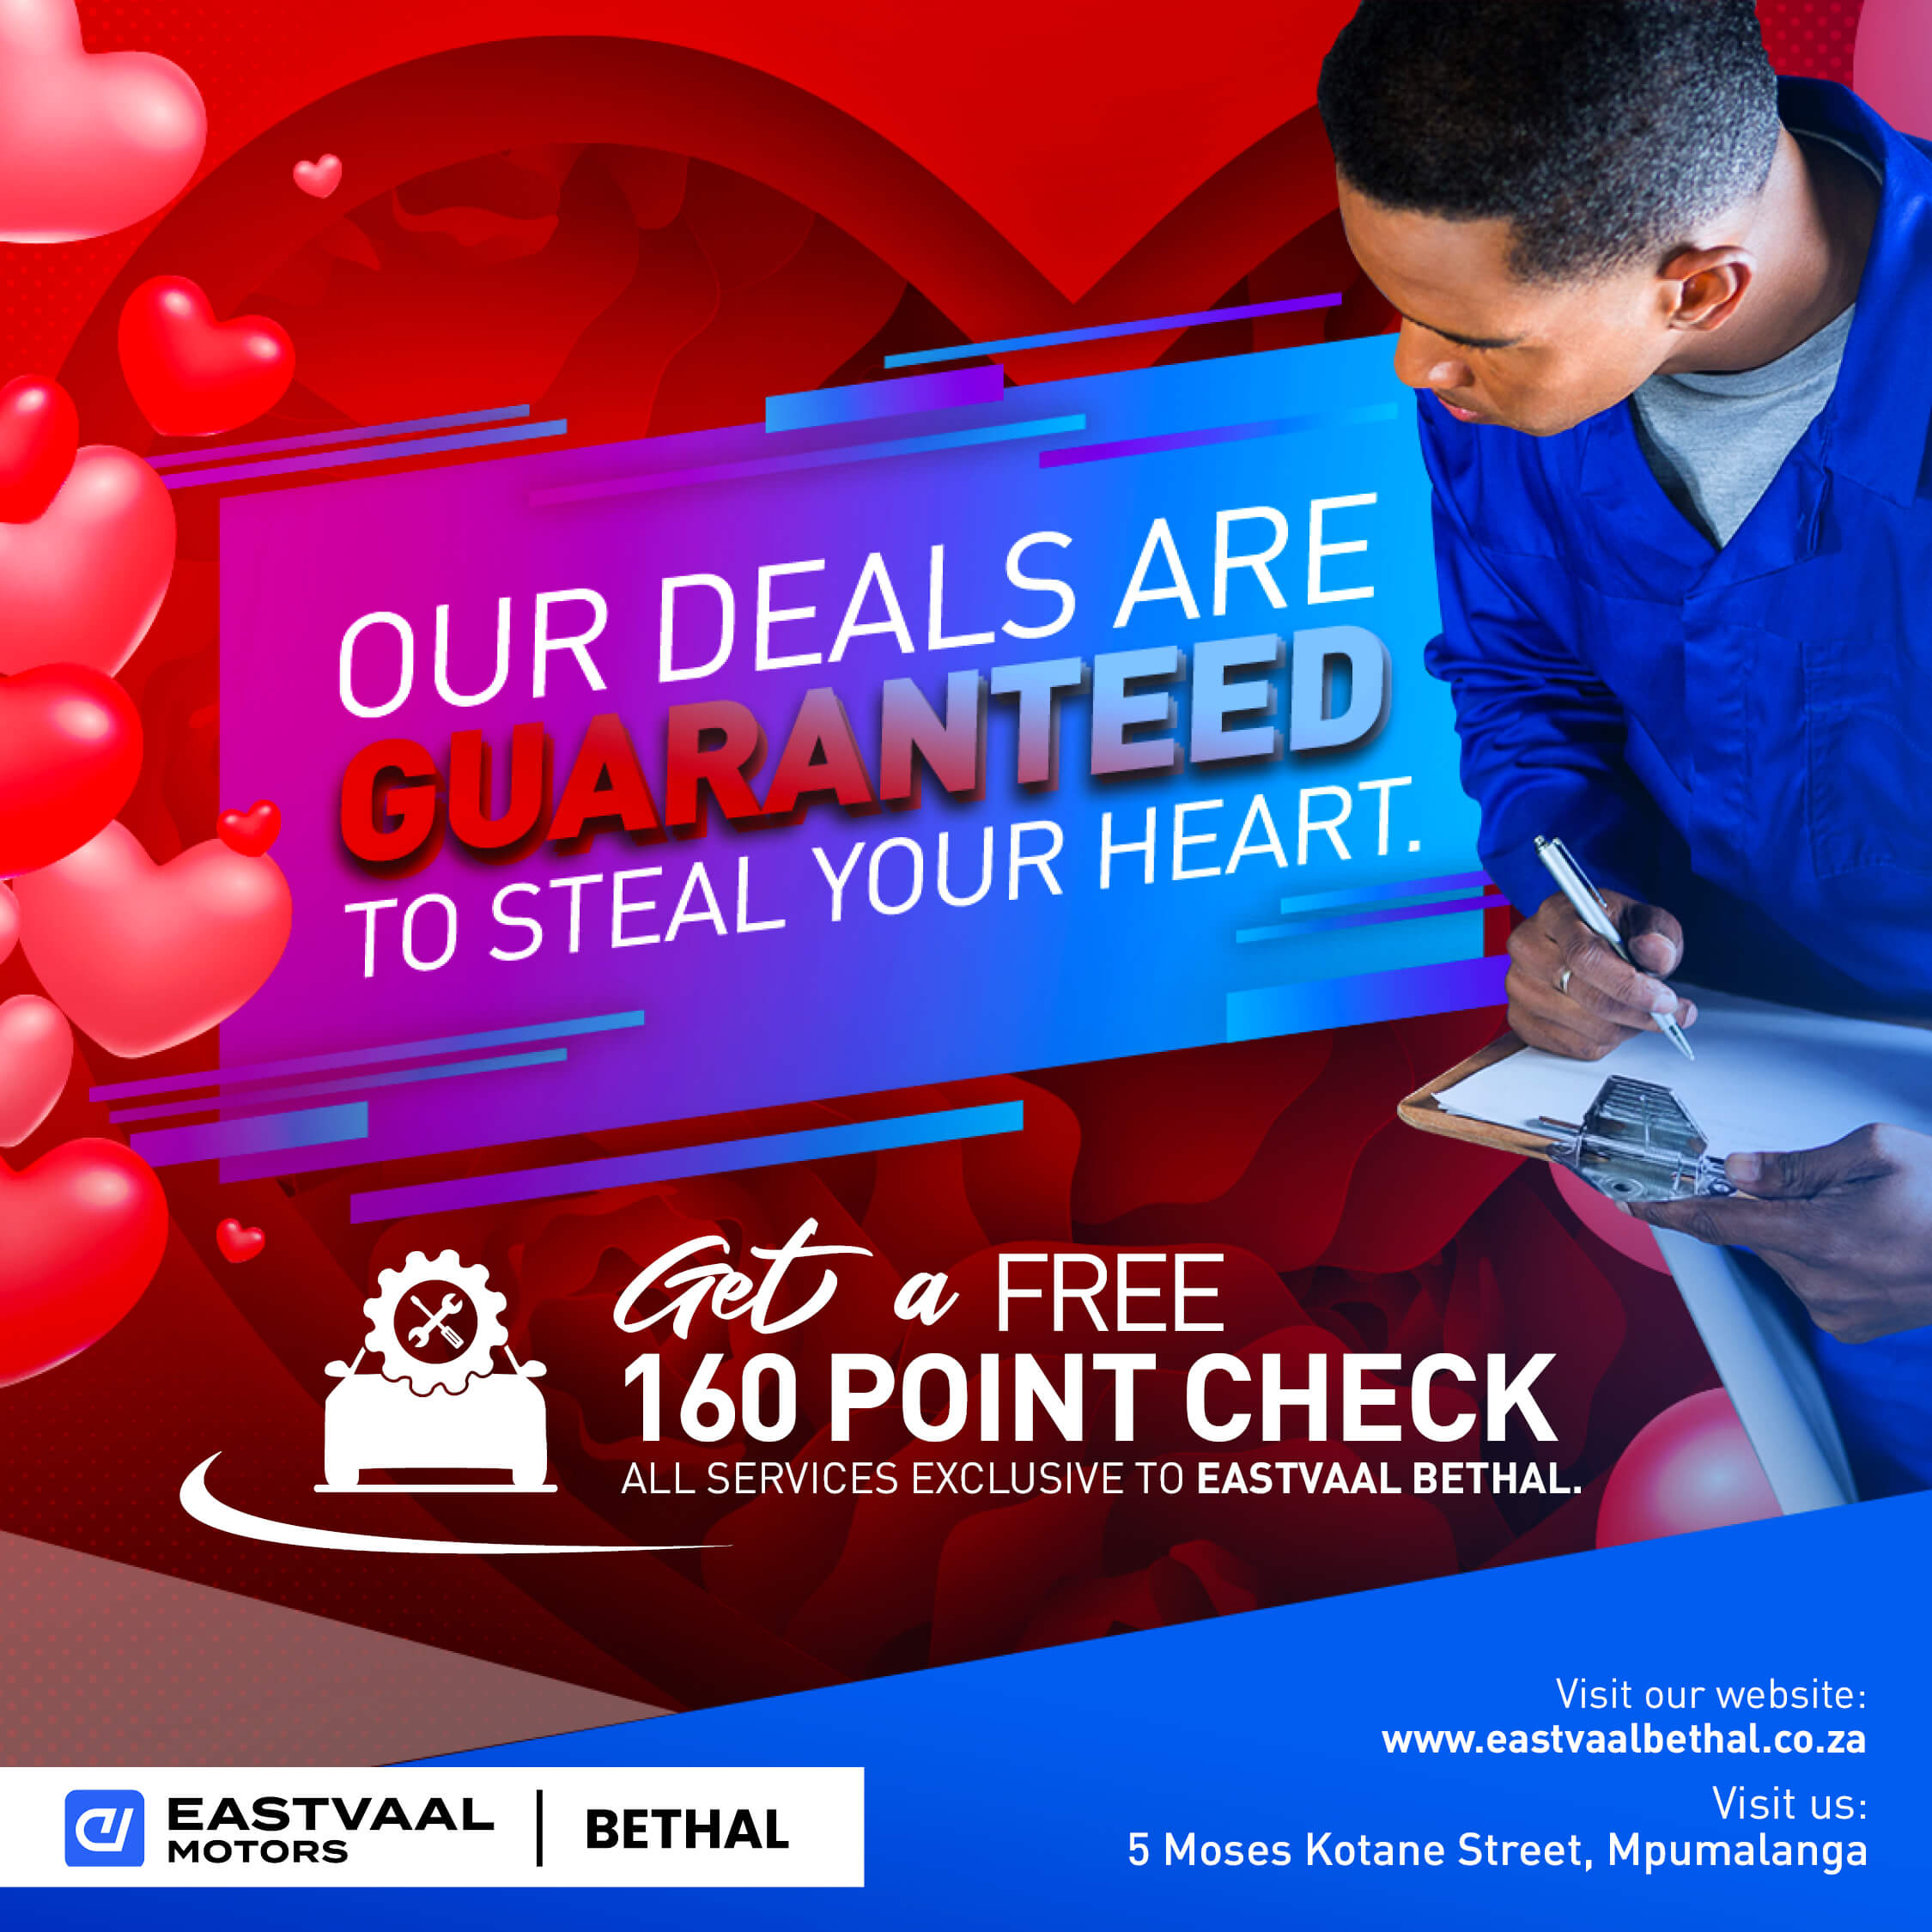 OUR DEALS ARE GUARANTEED TO STEAL YOUR HEART image from Eastvaal Motors